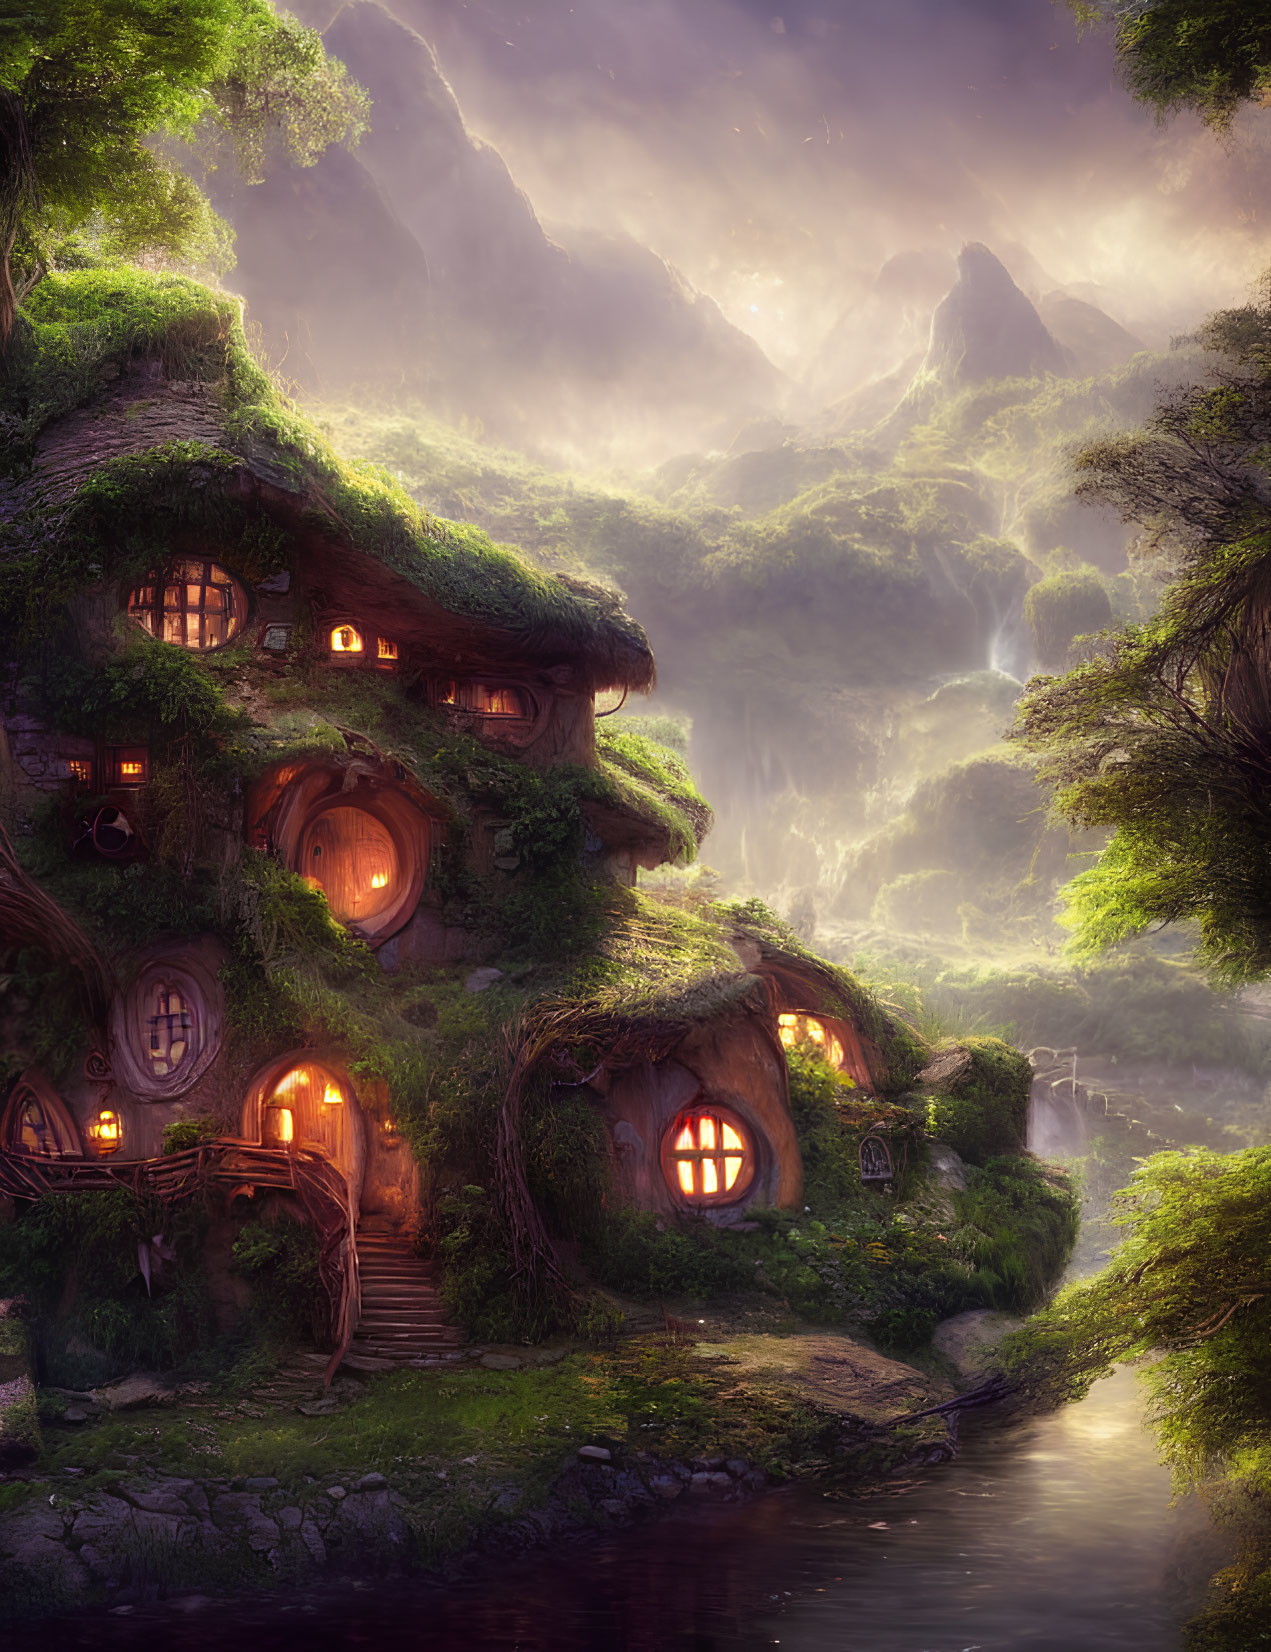 Quaint hobbit-style houses nestled in green hills with glowing windows by a serene river in a mystical